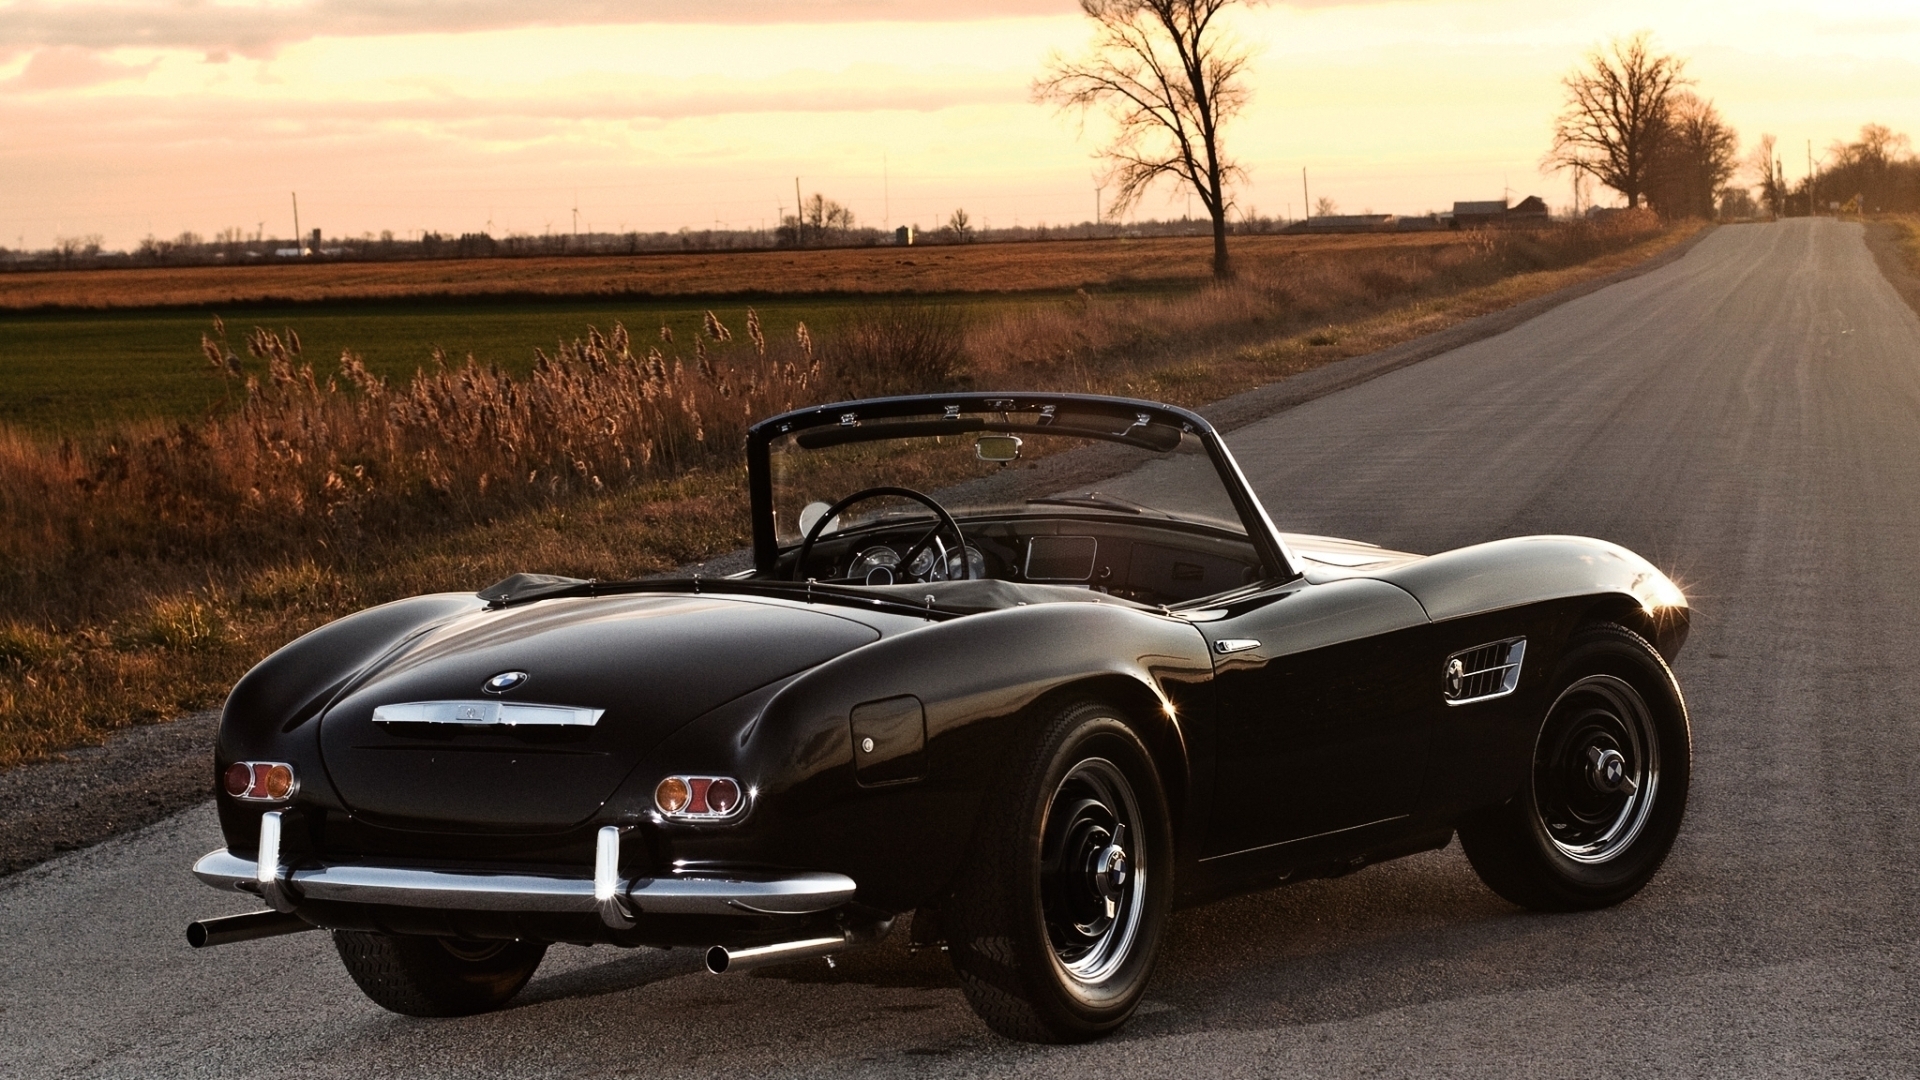 1957 BMW 507 Series 2 for 1920 x 1080 HDTV 1080p resolution